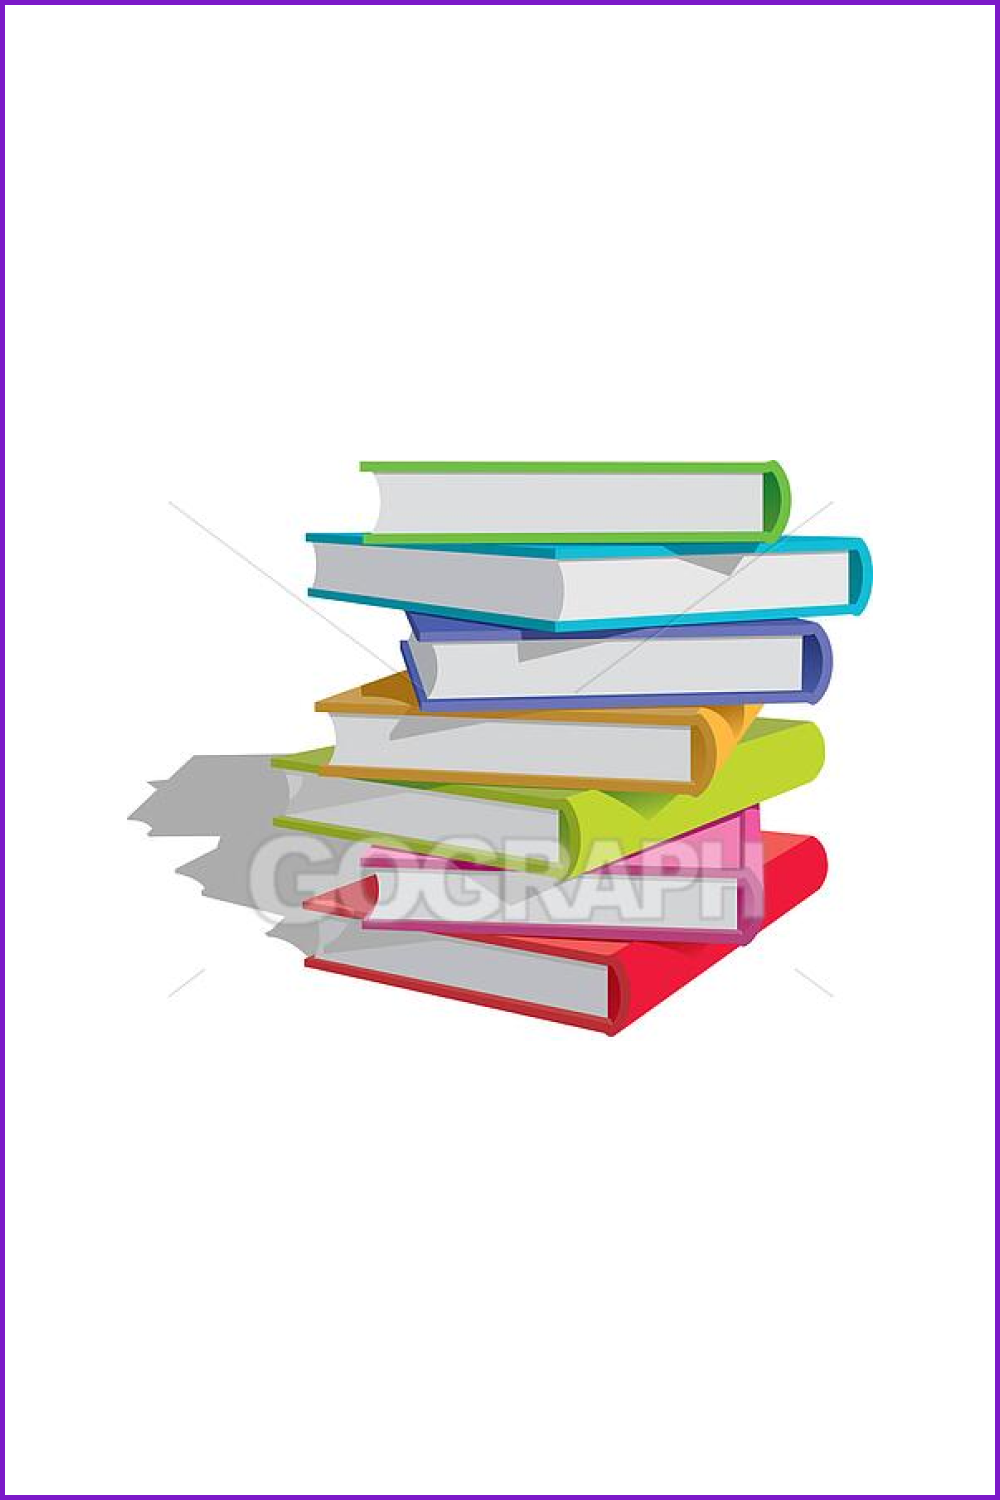 Stack of drawn books with colorful covers.